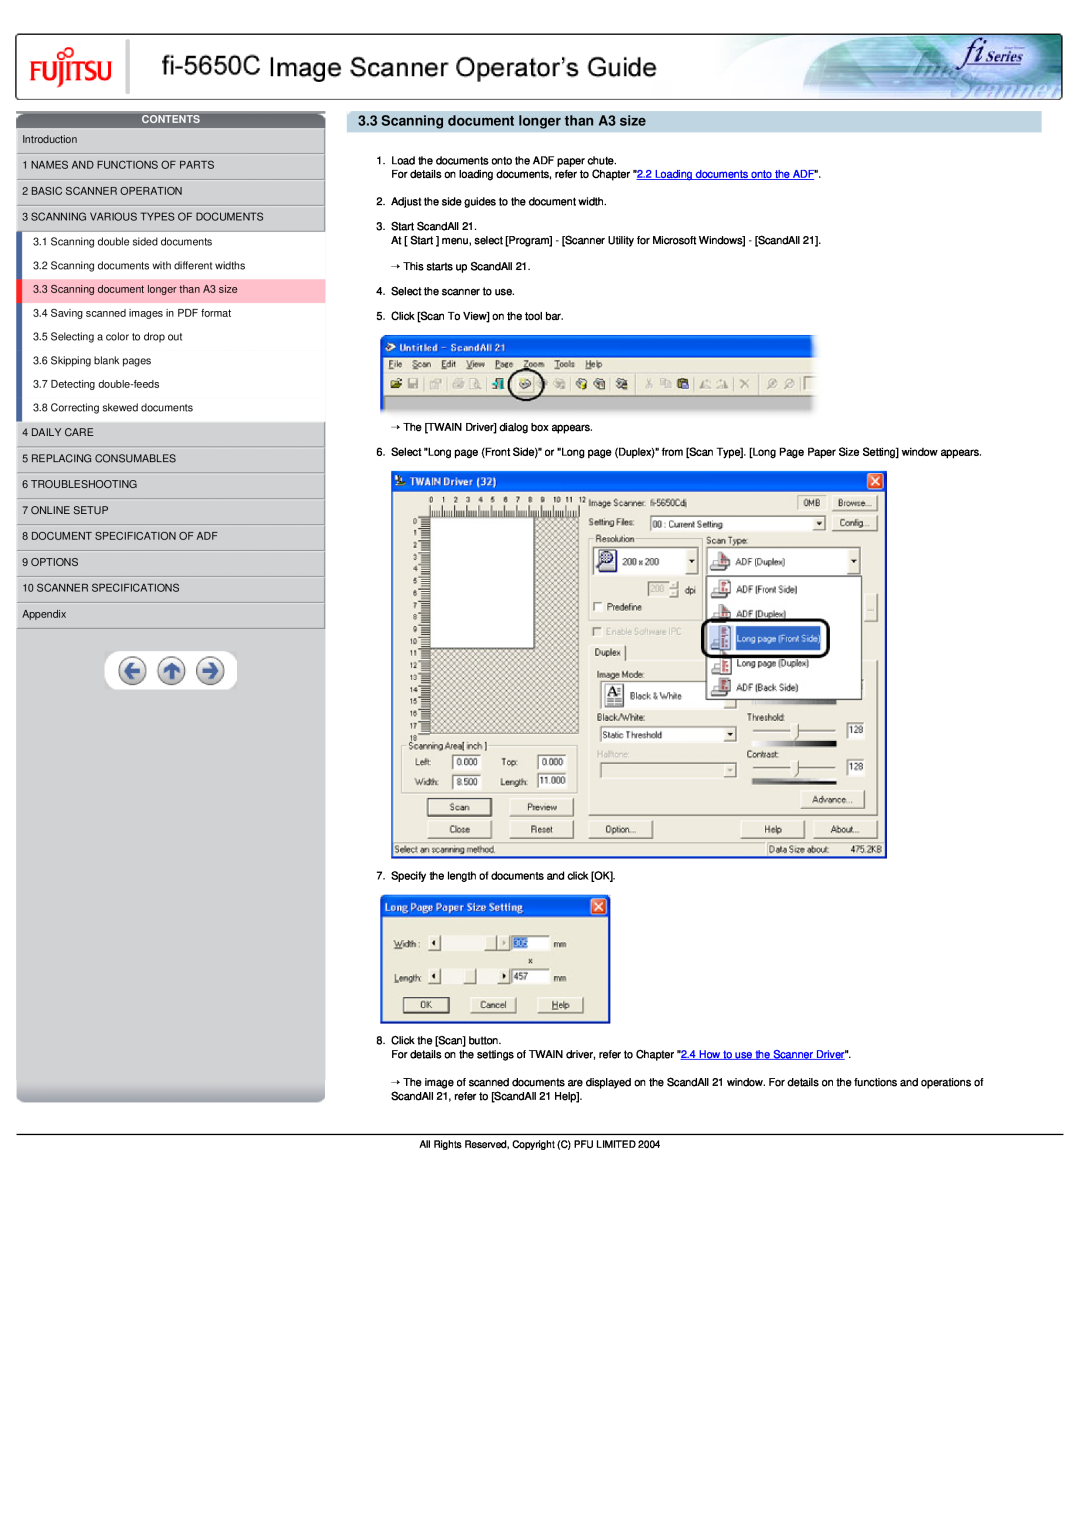 Fujitsu fi-5650C specifications Scanning document longer than A3 size, Contents 